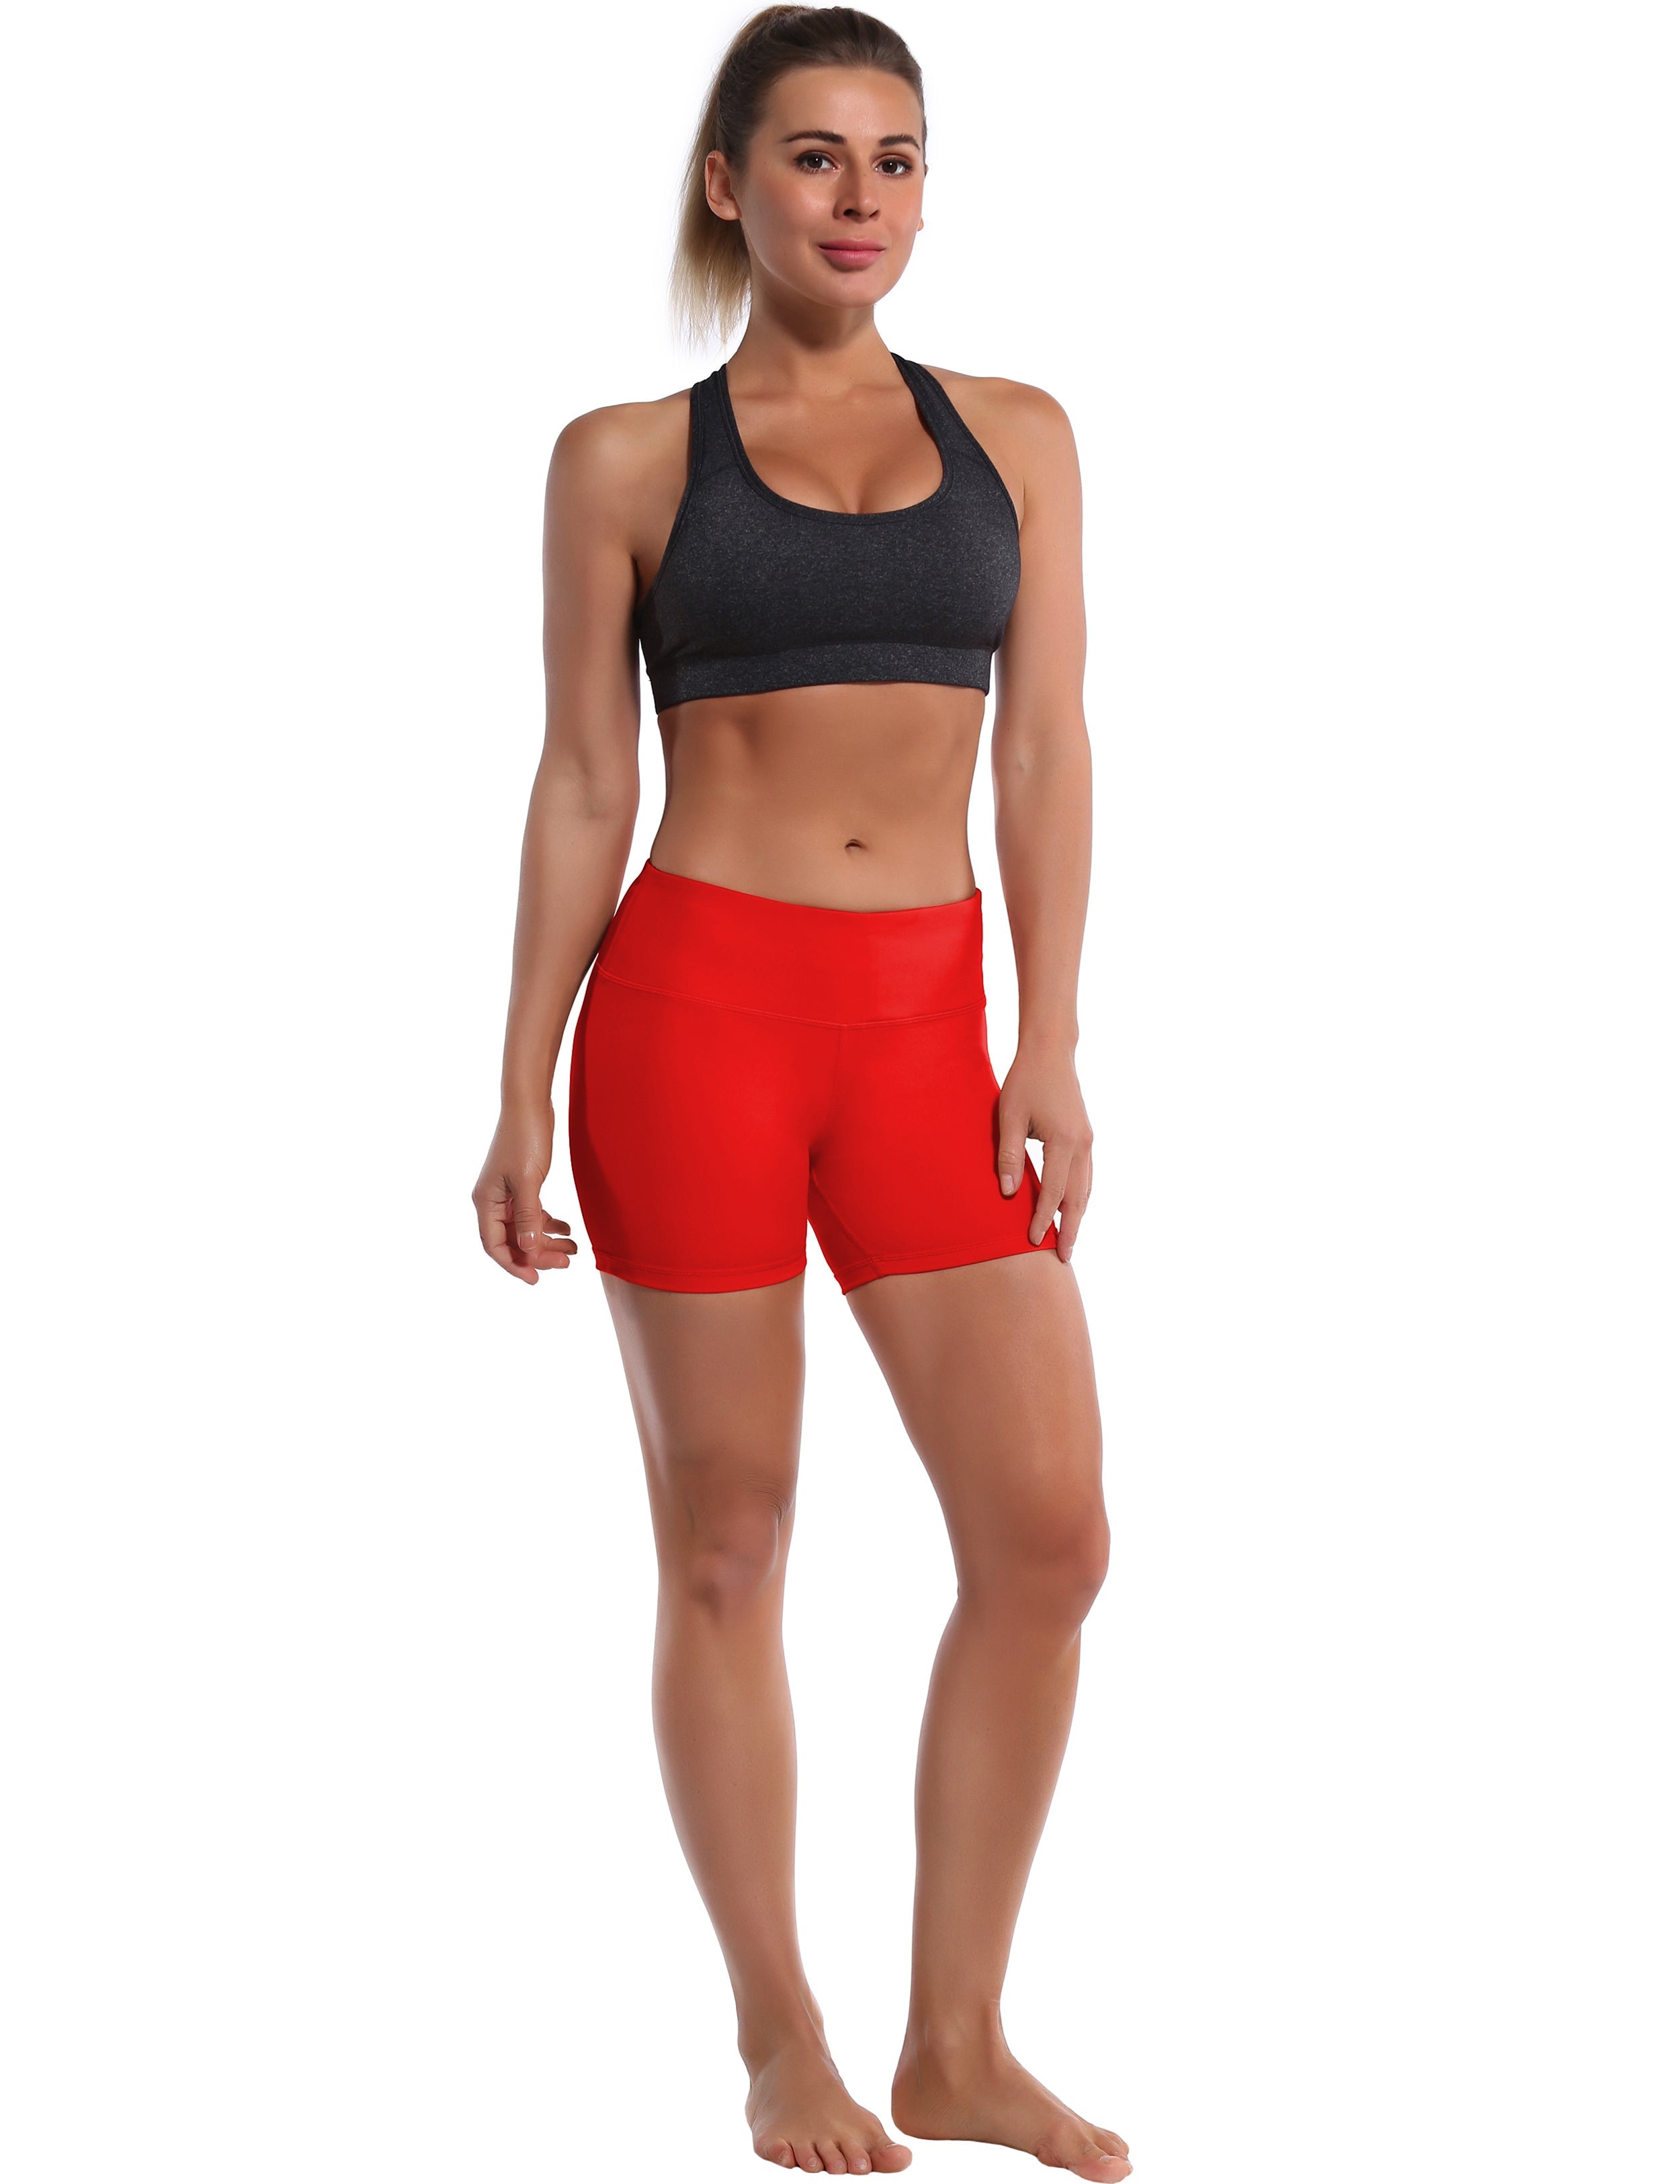 4" Jogging Shorts scarlet Sleek, soft, smooth and totally comfortable: our newest style is here. Softest-ever fabric High elasticity High density 4-way stretch Fabric doesn't attract lint easily No see-through Moisture-wicking Machine wash 75% Nylon, 25% Spandex